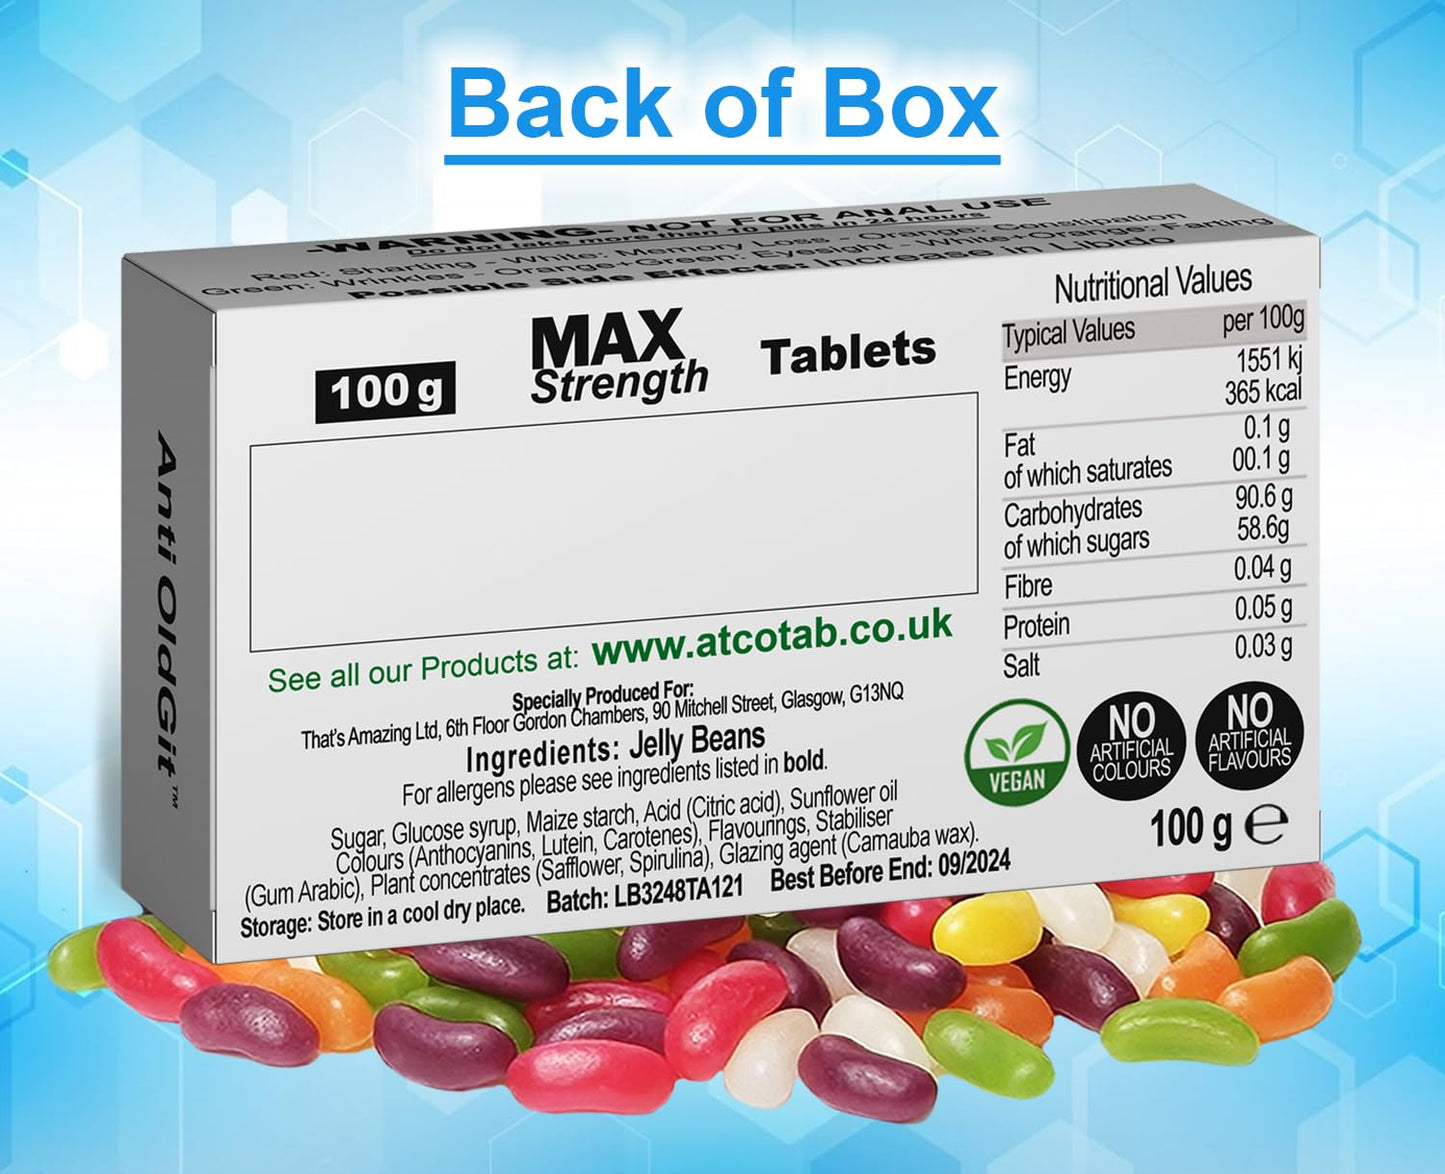 Funny Rude Joke Tablets Pill Box Prank Includes Jelly Beans Sweets Unusual Gift for Men Father's Day Him Her April Fools Day Easter Birthday Gifts for Women Presents for Dad Boyfriend